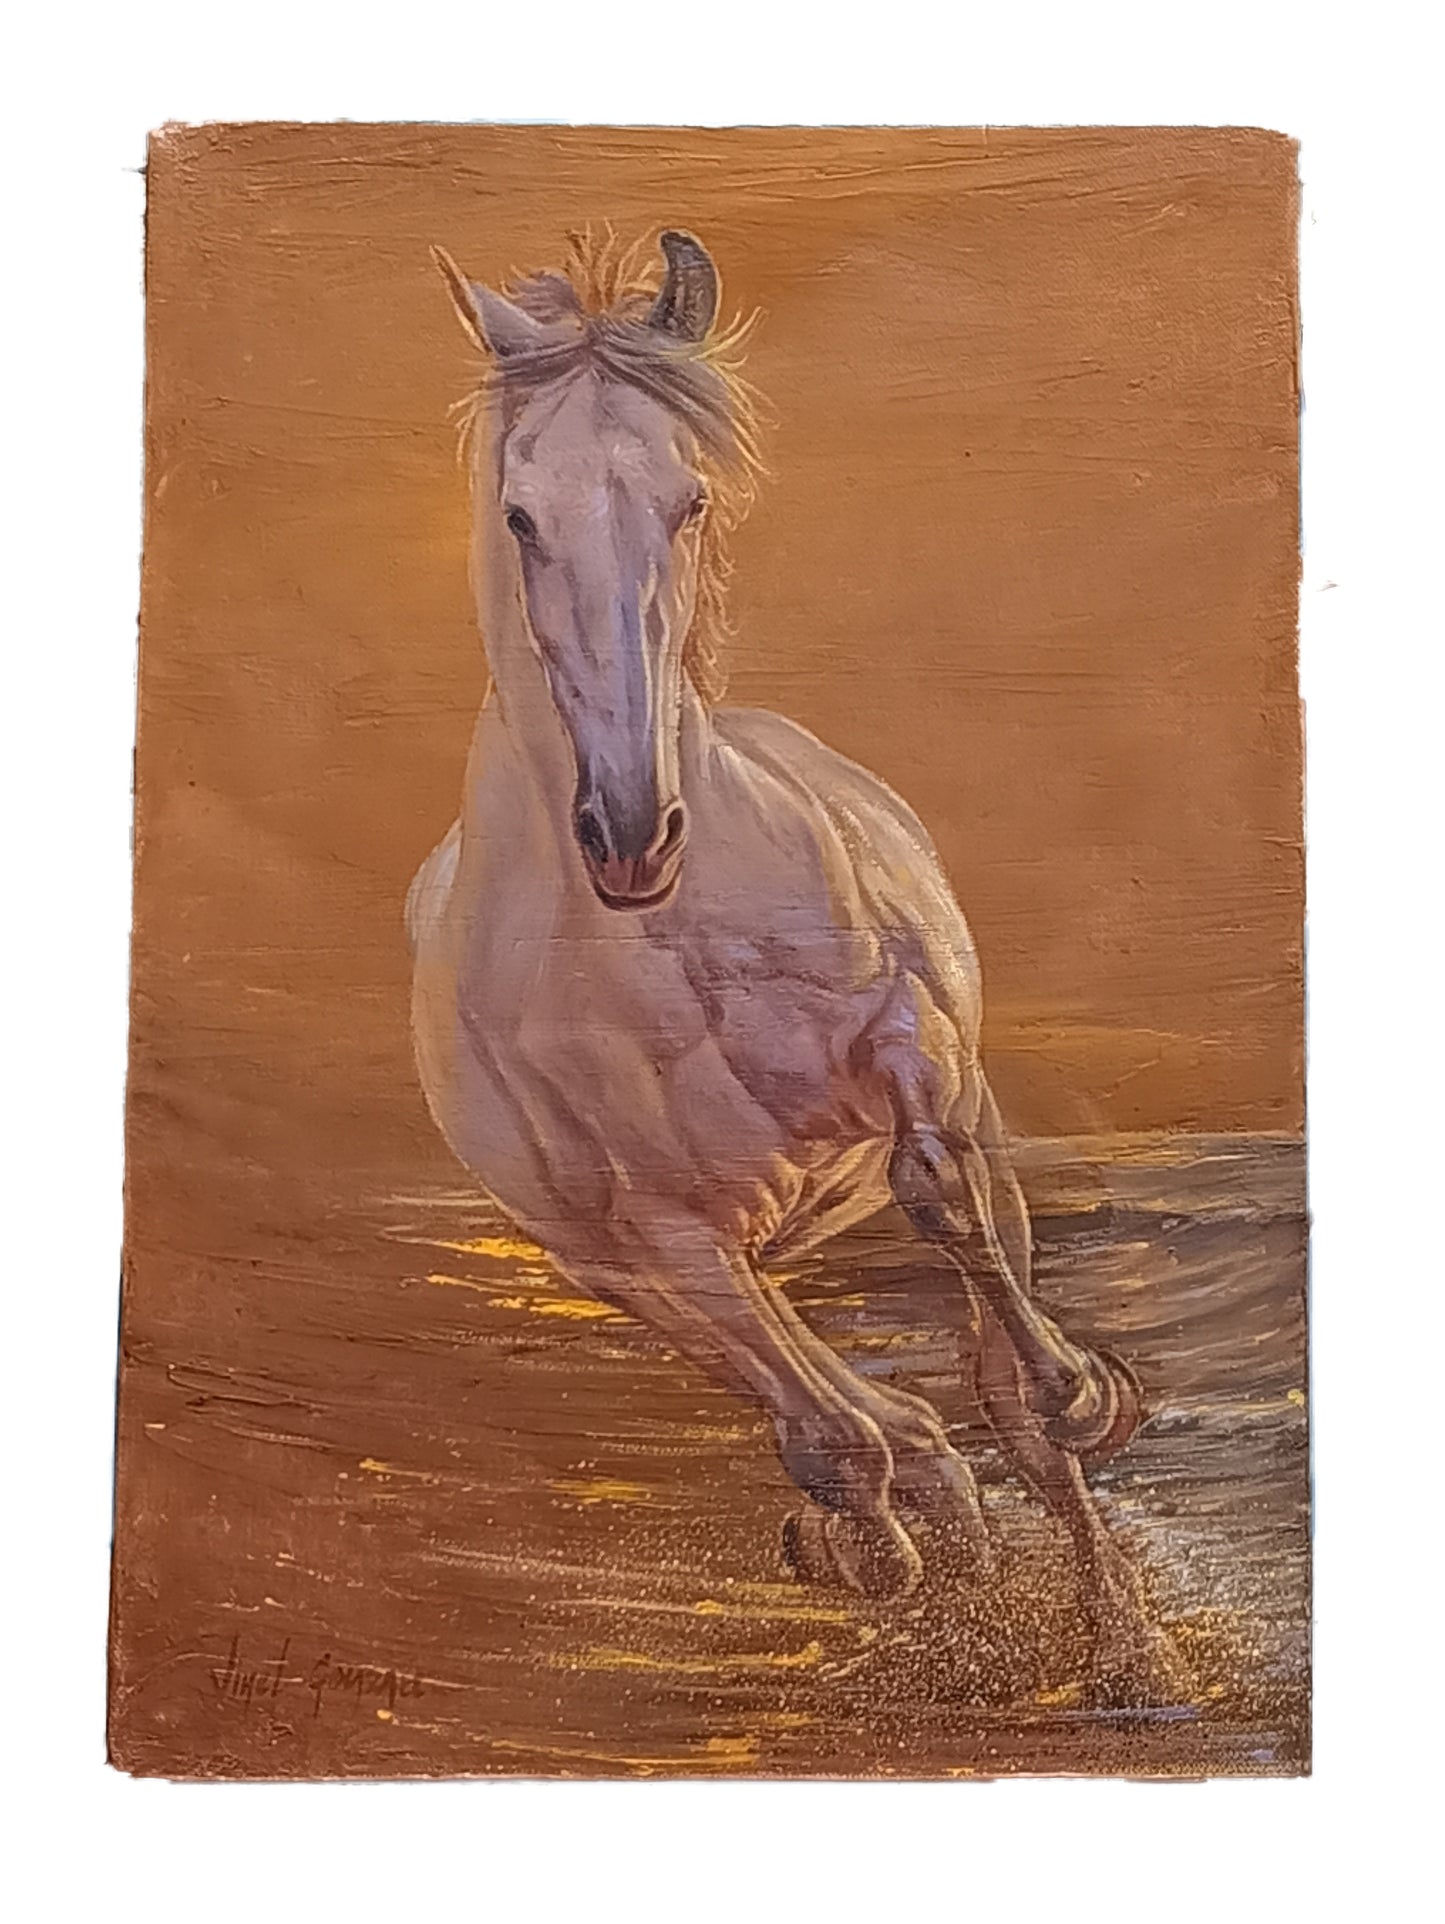 Horse Painting - Happiness and Freedom - Canvas on Oil - wall decoration - kmnk deco 